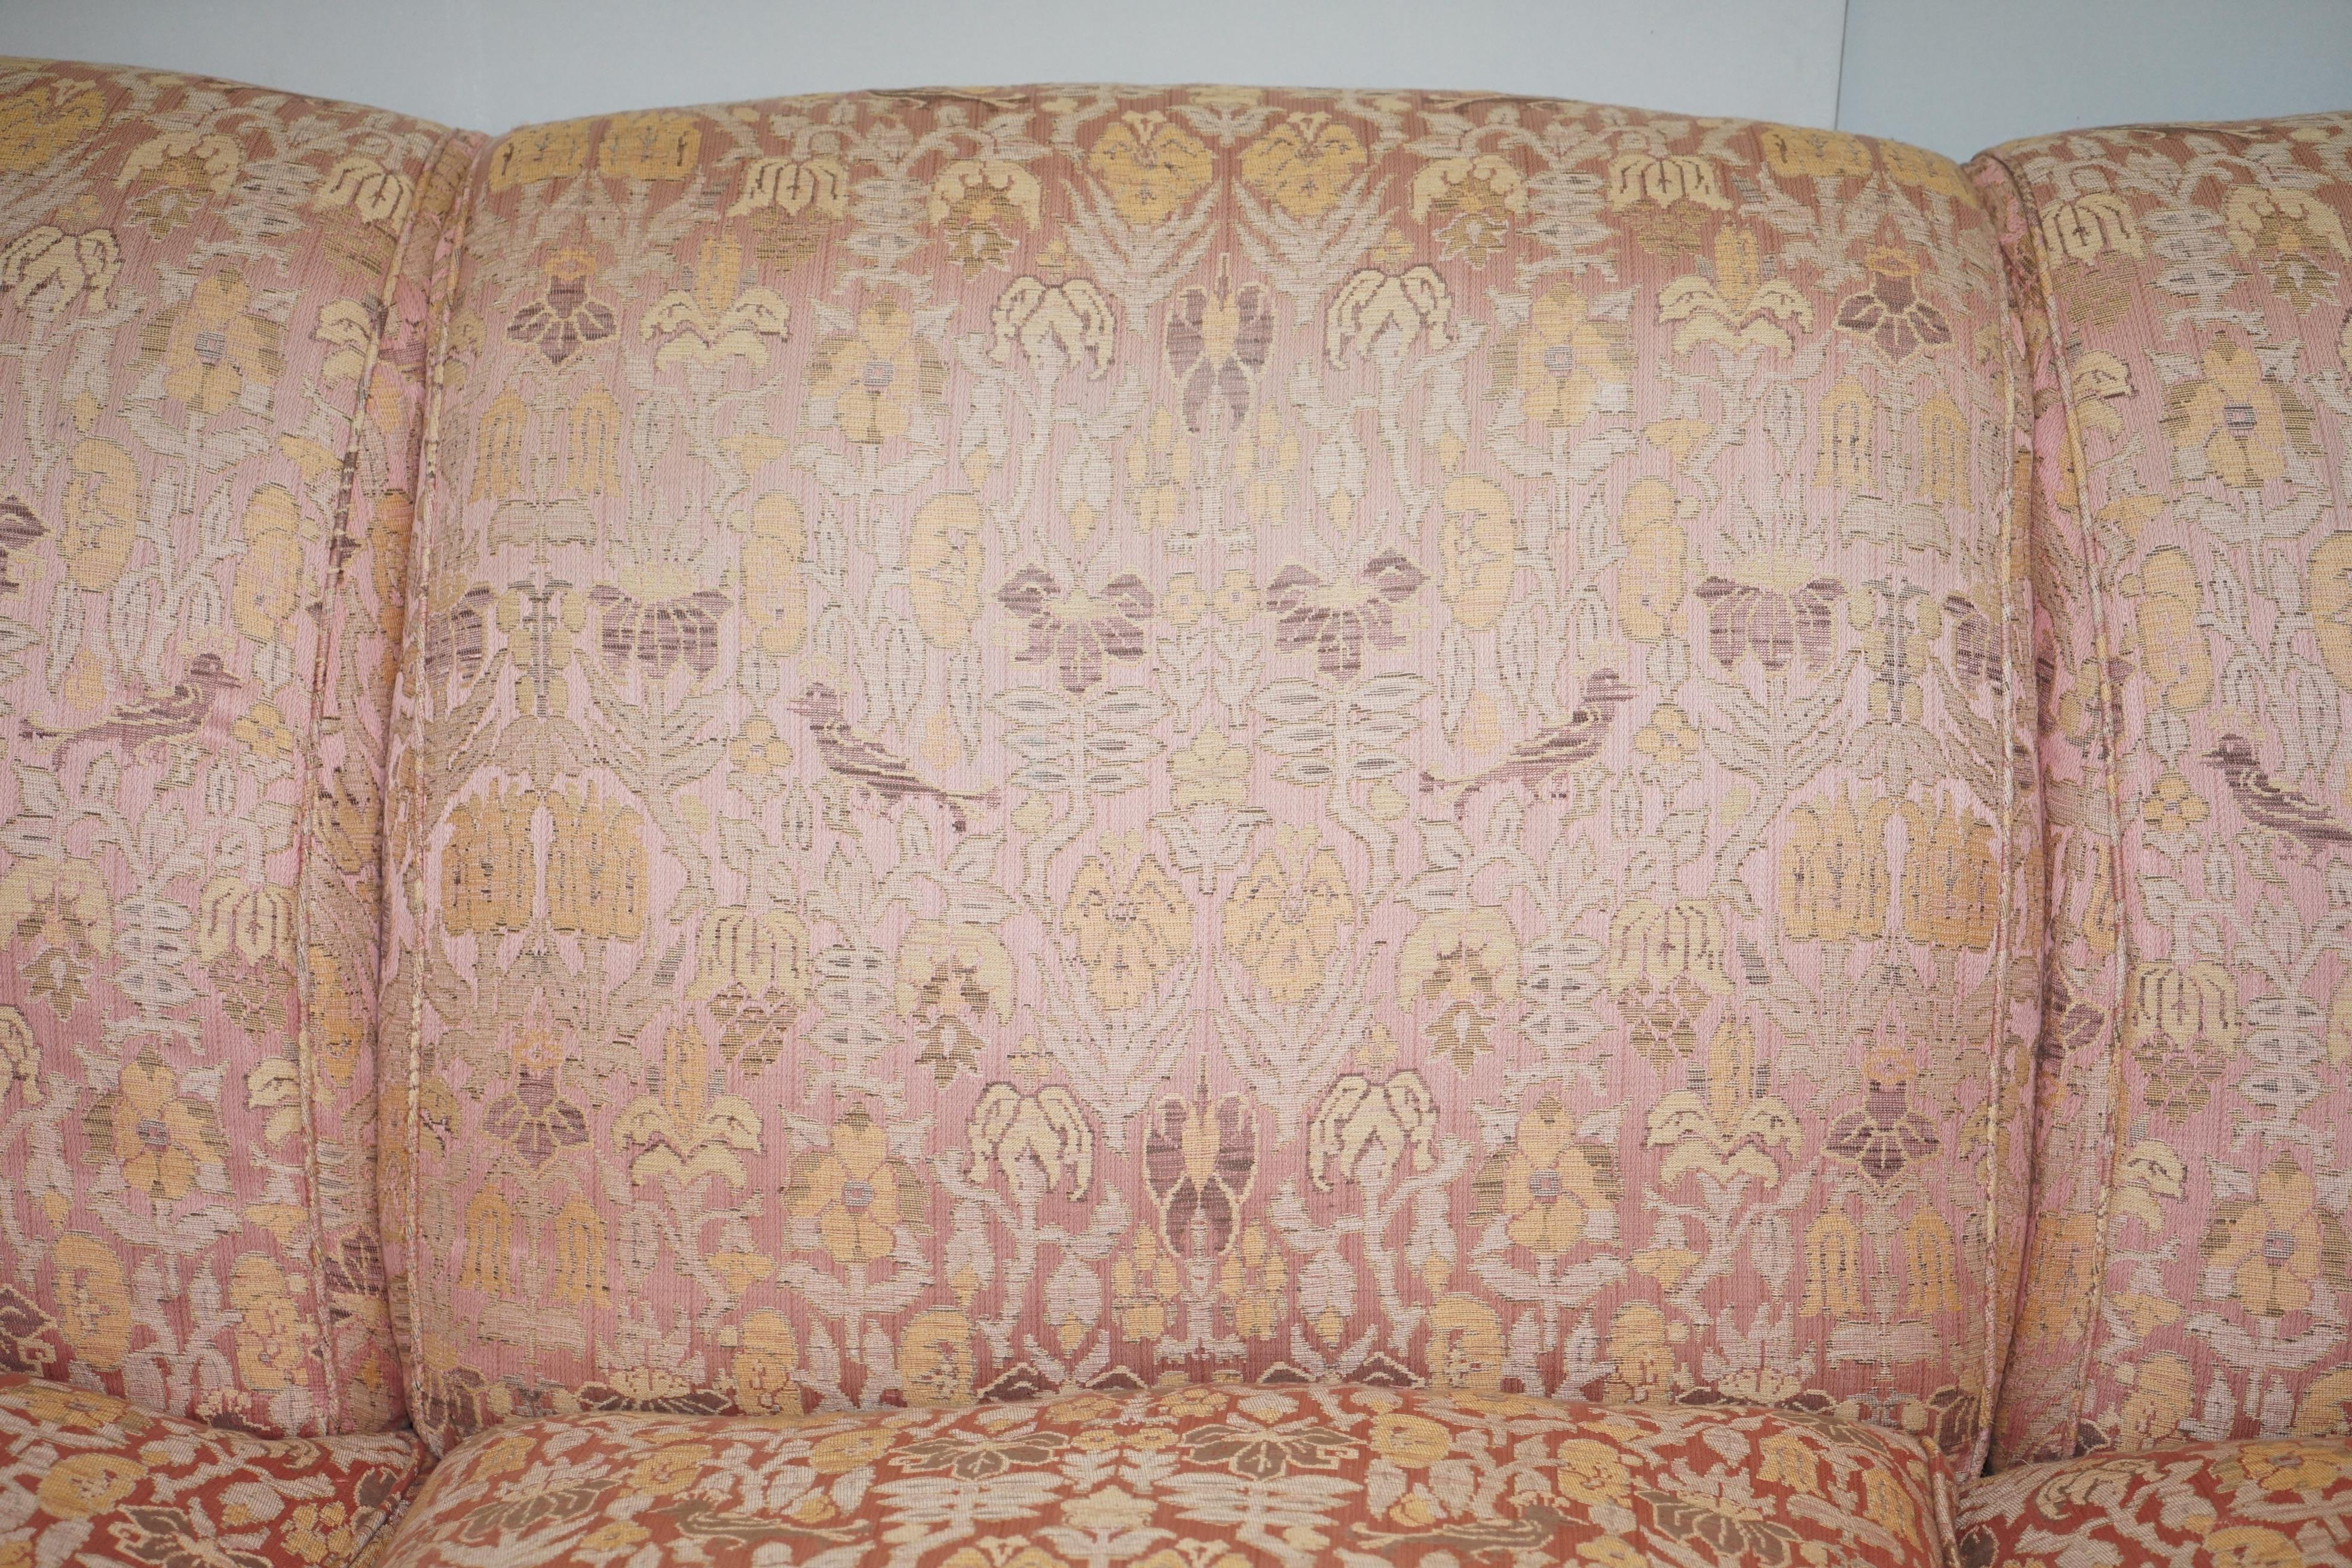 1 of 2 George Smith Scroll Arm Three-Seat Sofas Embroidered Fabric 4